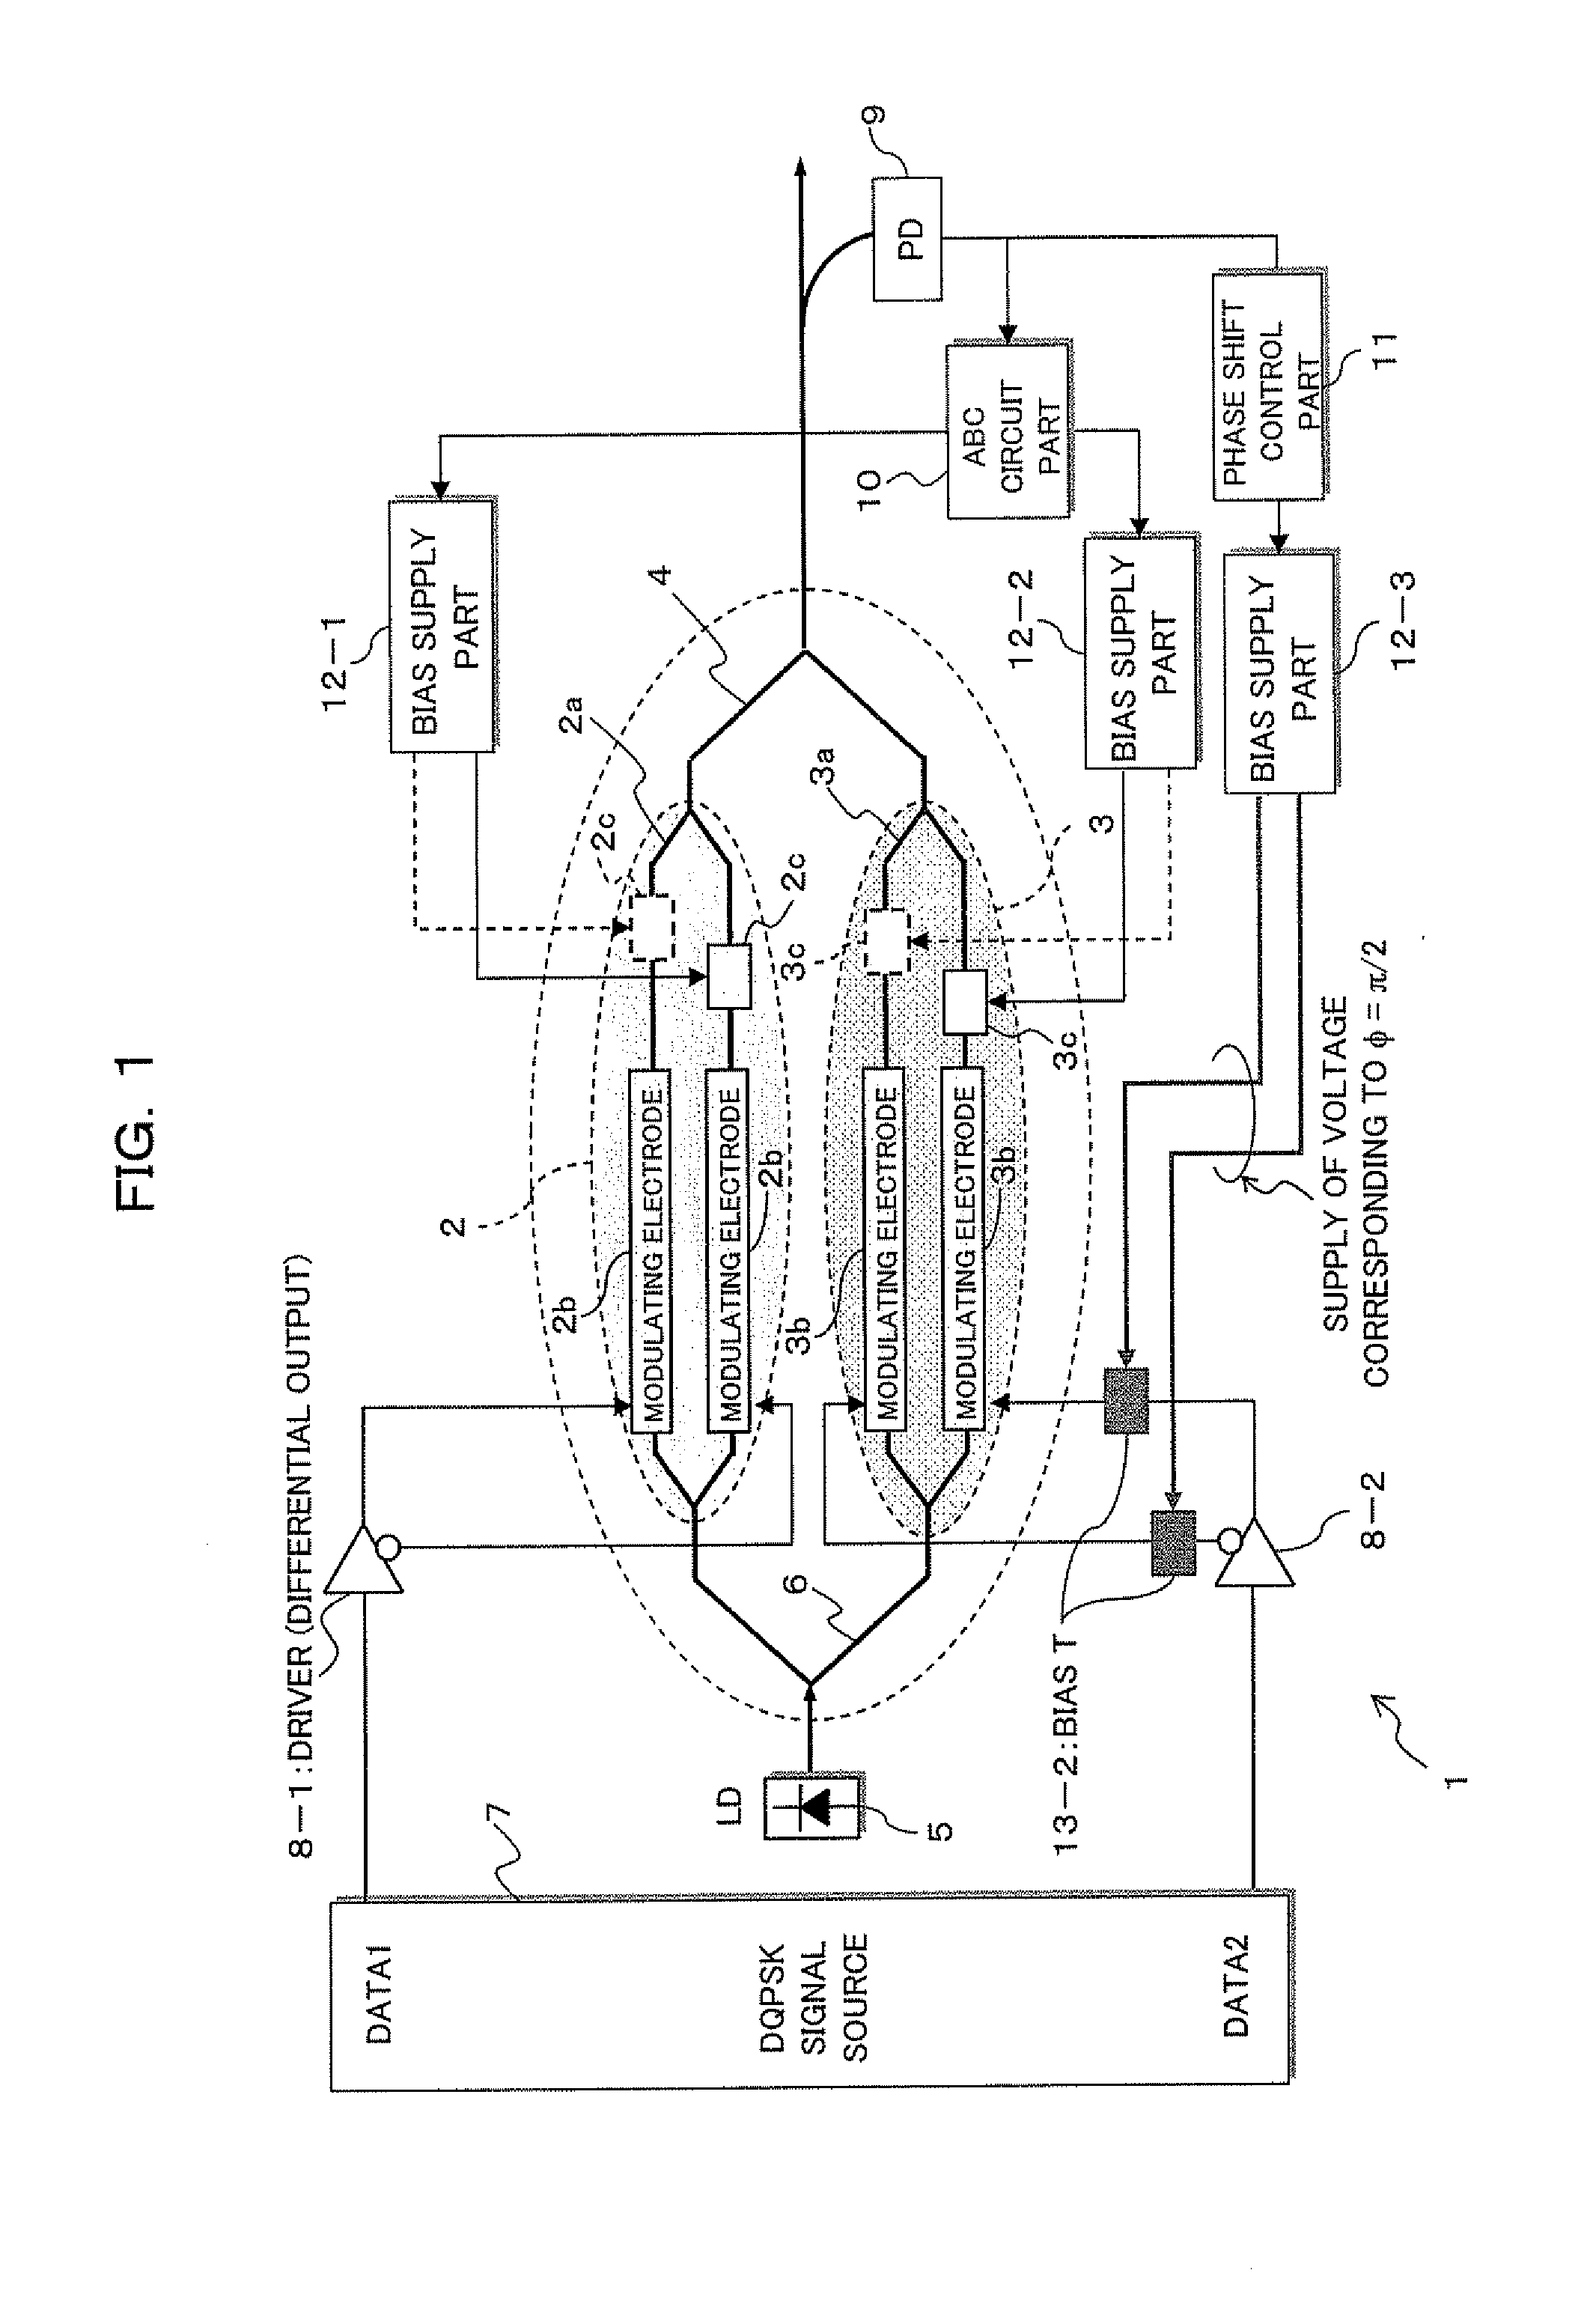 Differential m phase-shift modulator